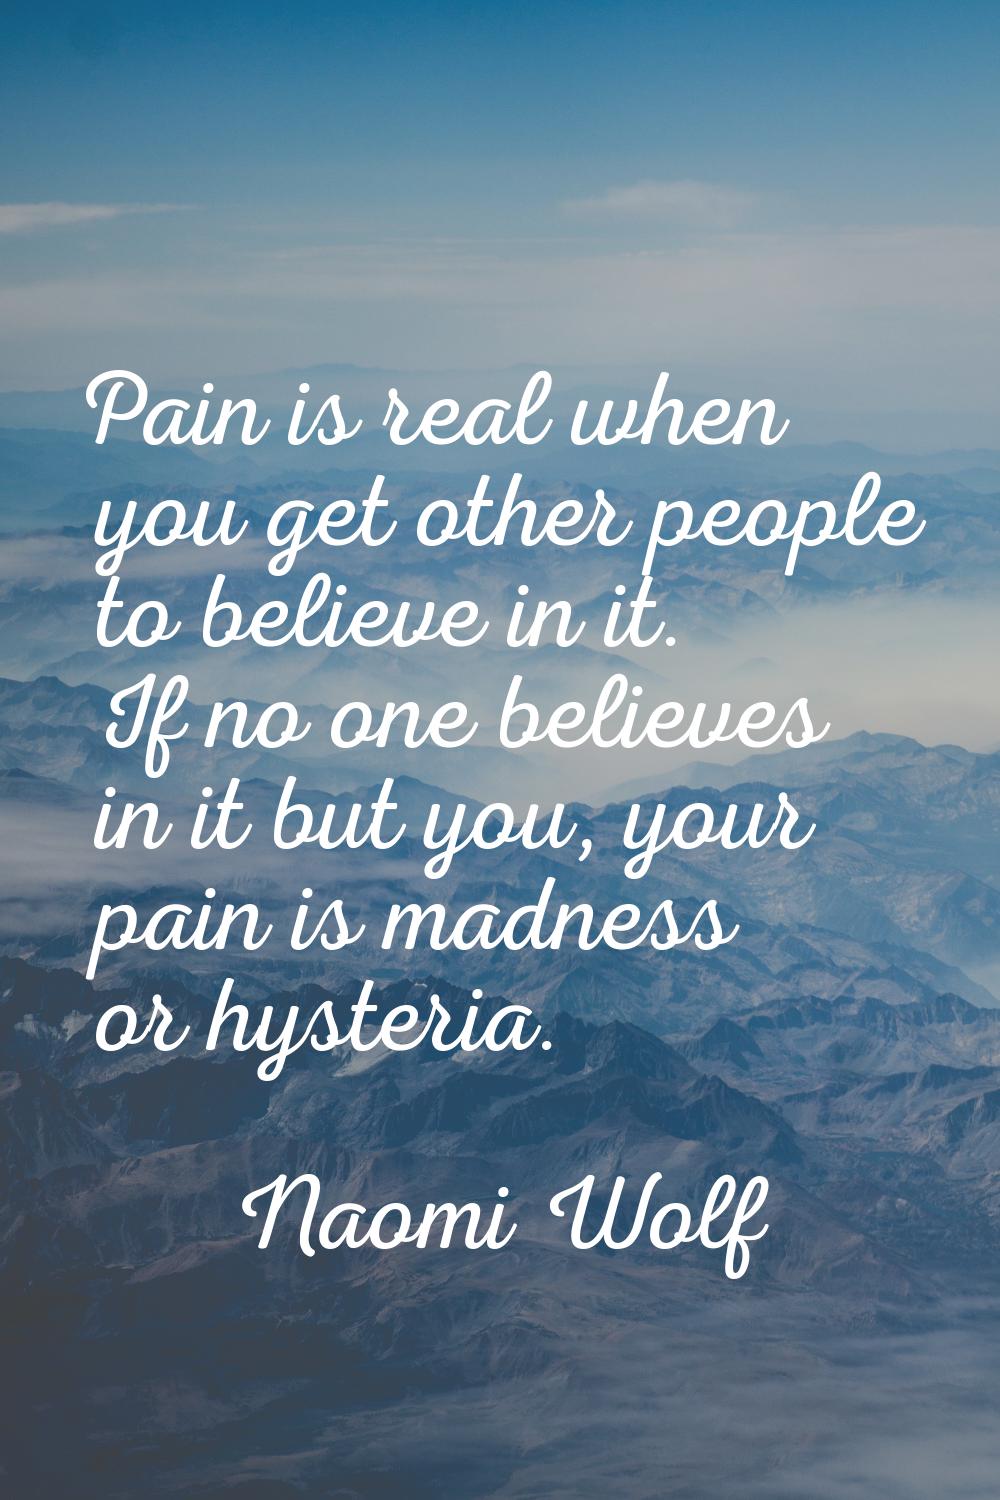 Pain is real when you get other people to believe in it. If no one believes in it but you, your pai